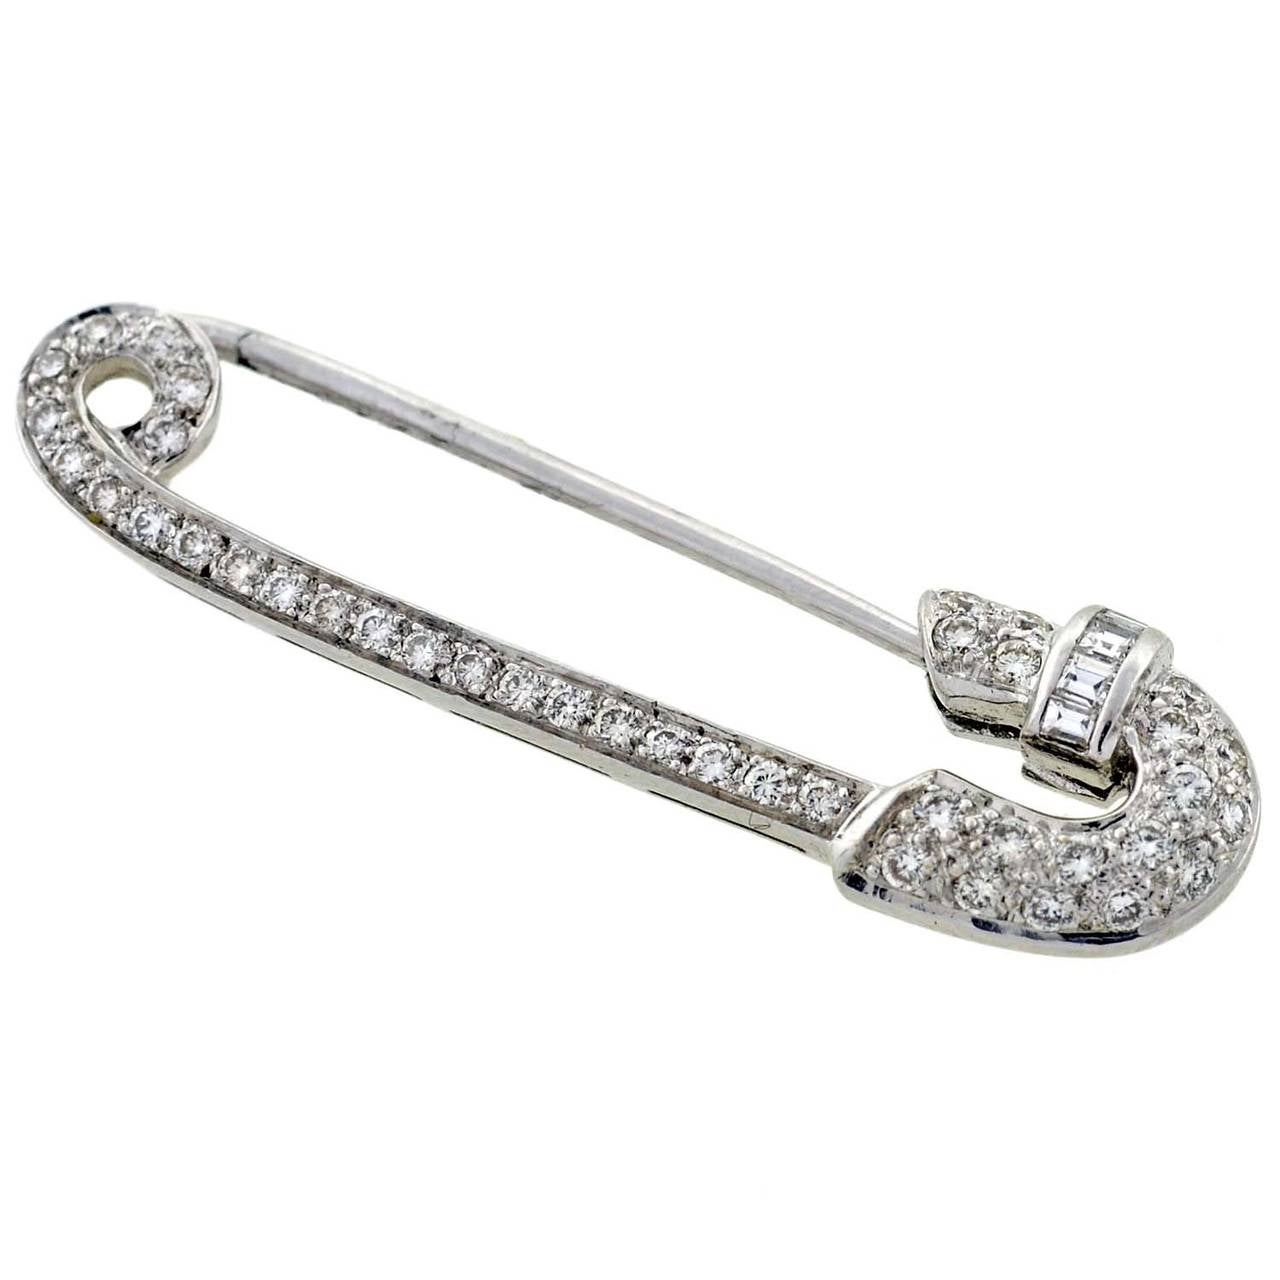 A fabulous Vintage gold and diamond pin from the 1950's! This attractive piece is made of 18kt white gold and portrays the shape of a large and functional safety pin. The head, side and hinge are accented with sparkling pave set diamonds, which add